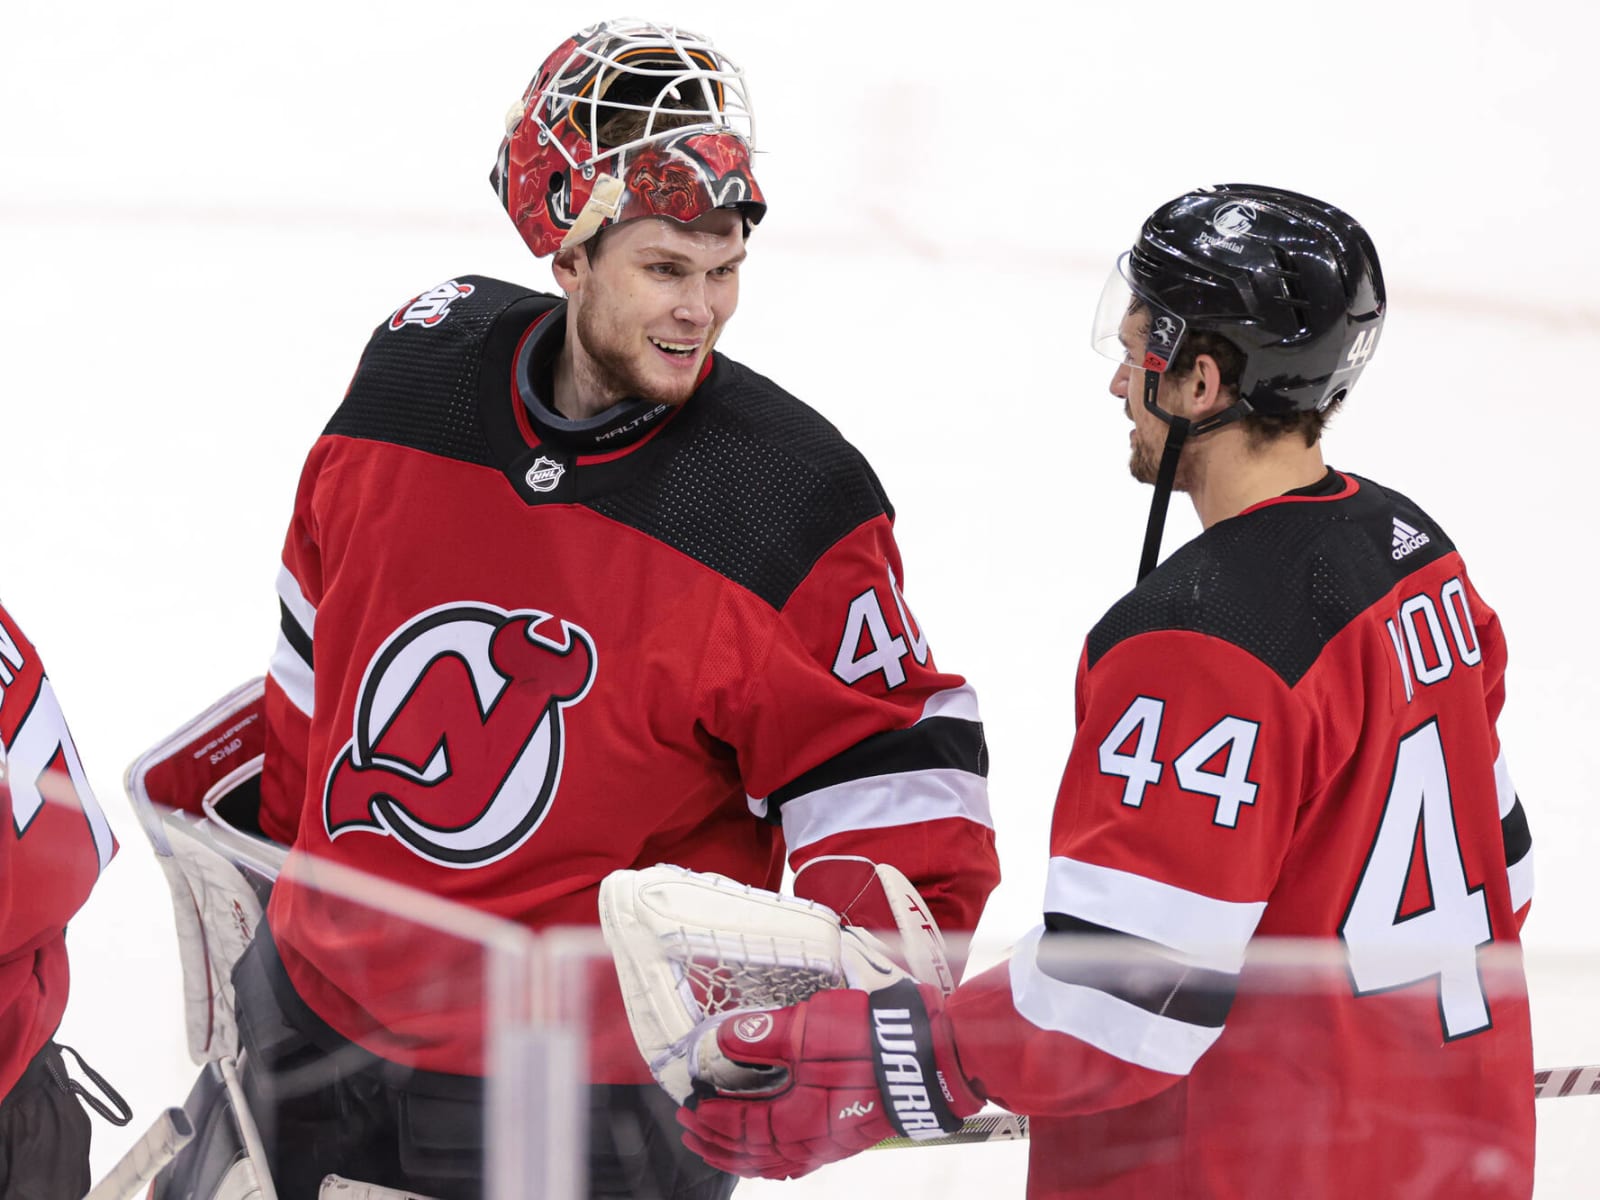 Devils Offseason Moves: Wood Leaves New Jersey in Free Agency